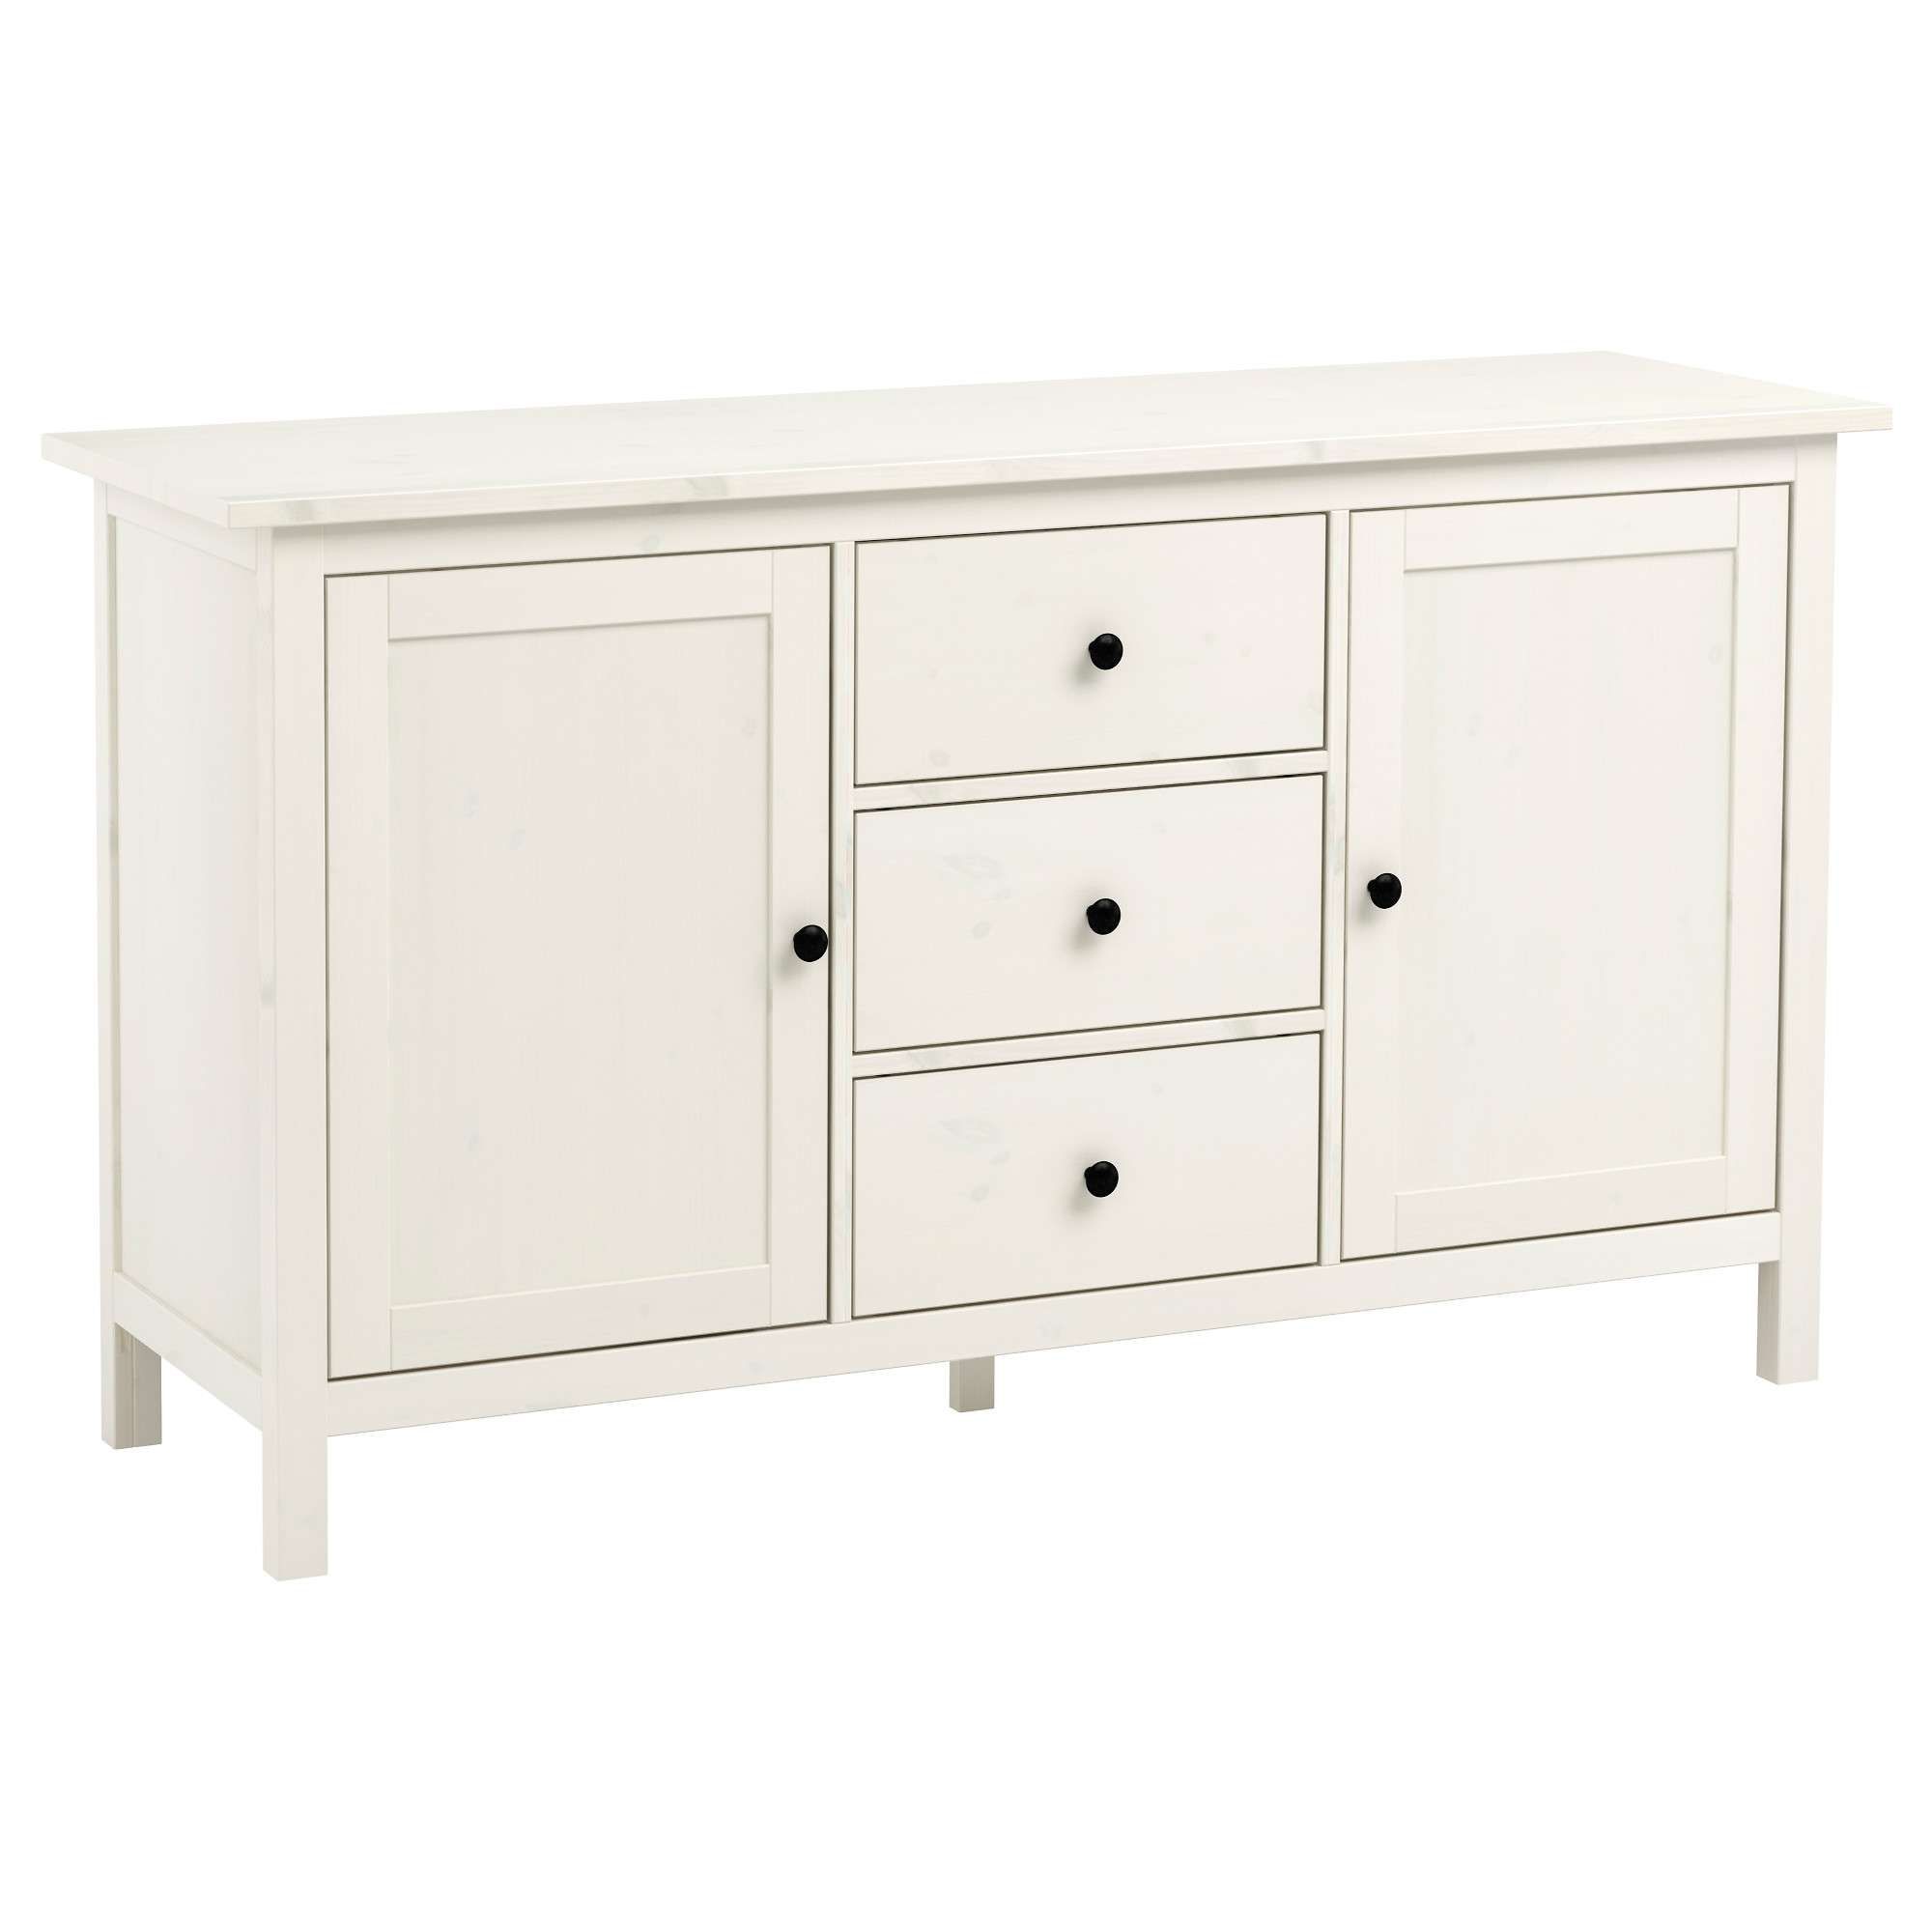 Hemnes Sideboard – White Stain – Ikea Within Narrow Sideboards And Buffets (View 6 of 20)